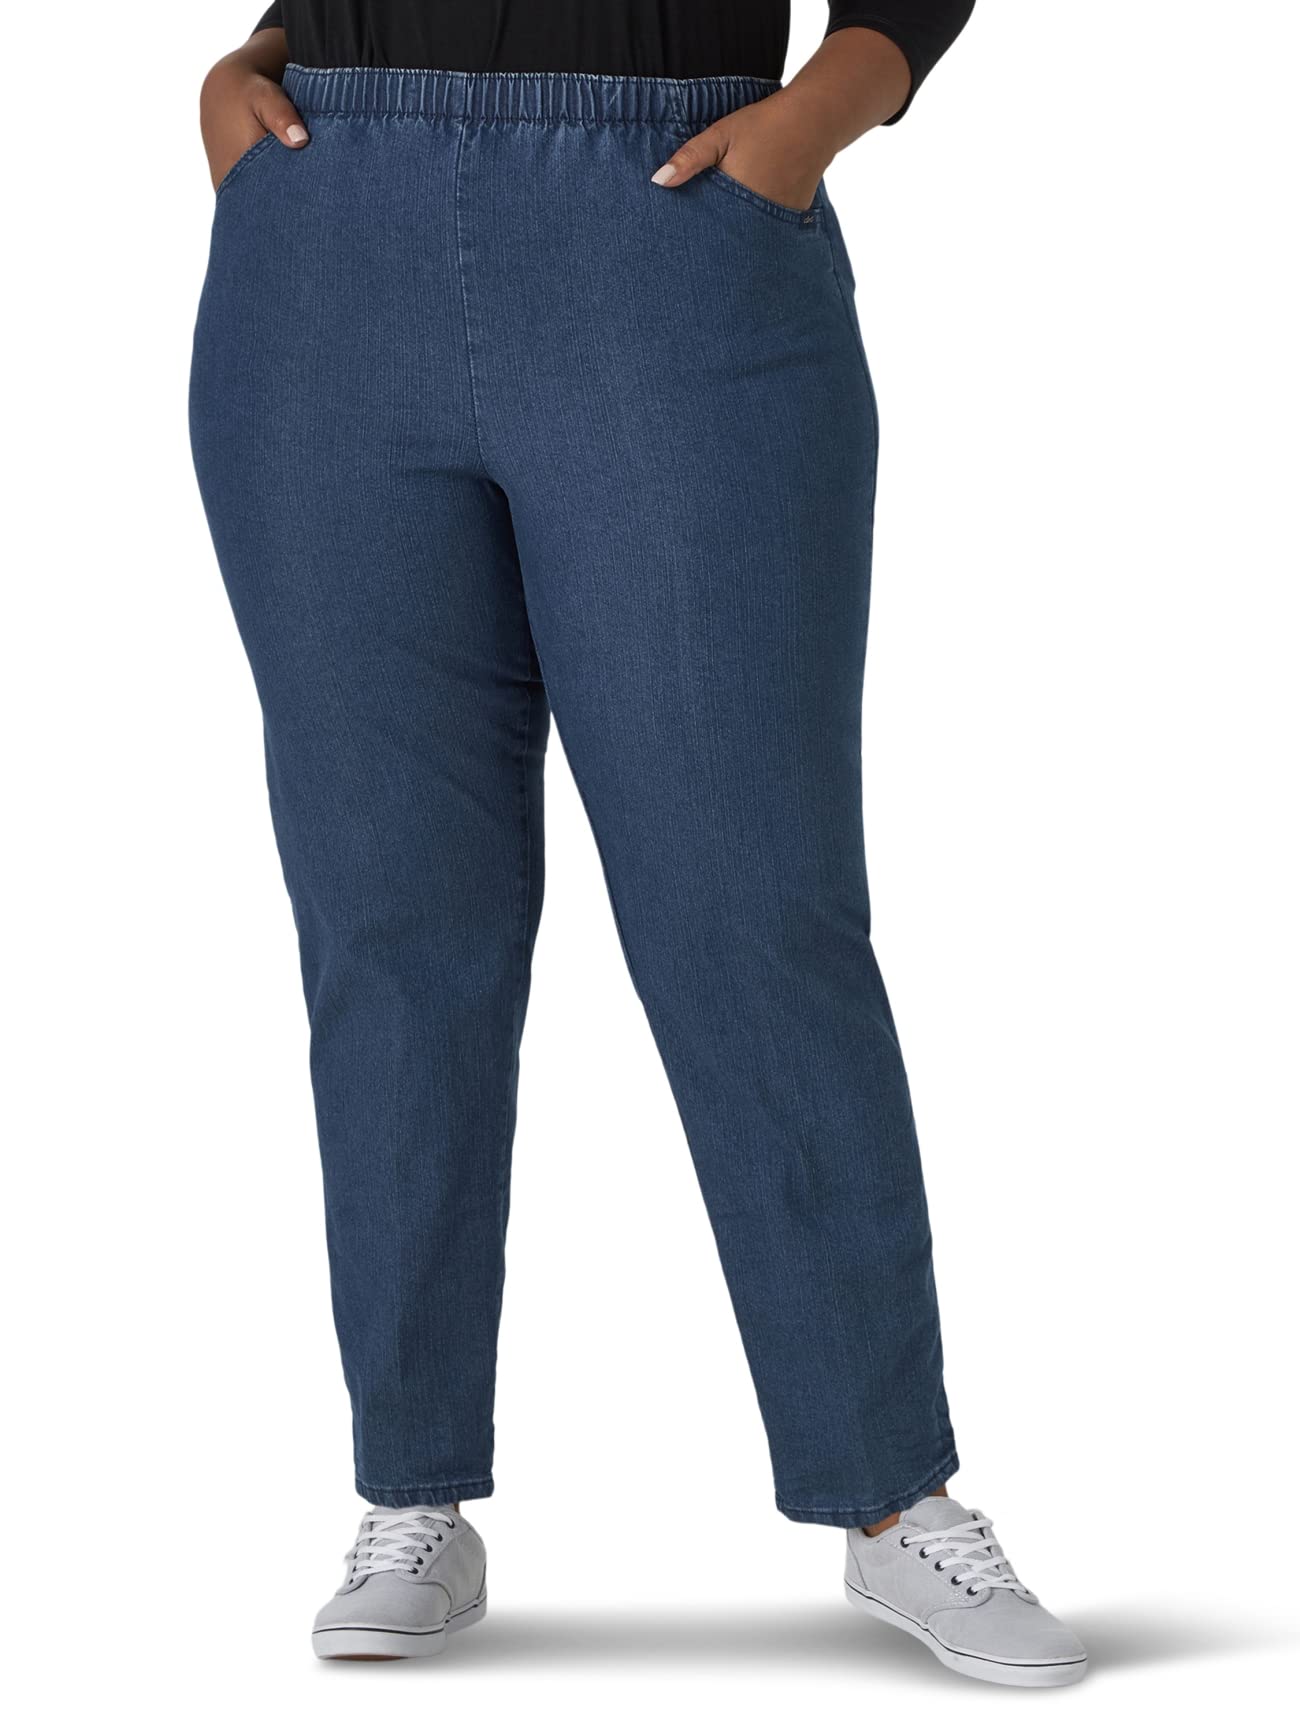 Chic Classic Collection Women's Plus Size Stretch Elastic Waist Pull-On Pant, Mid Shade Denim, 18W Petite